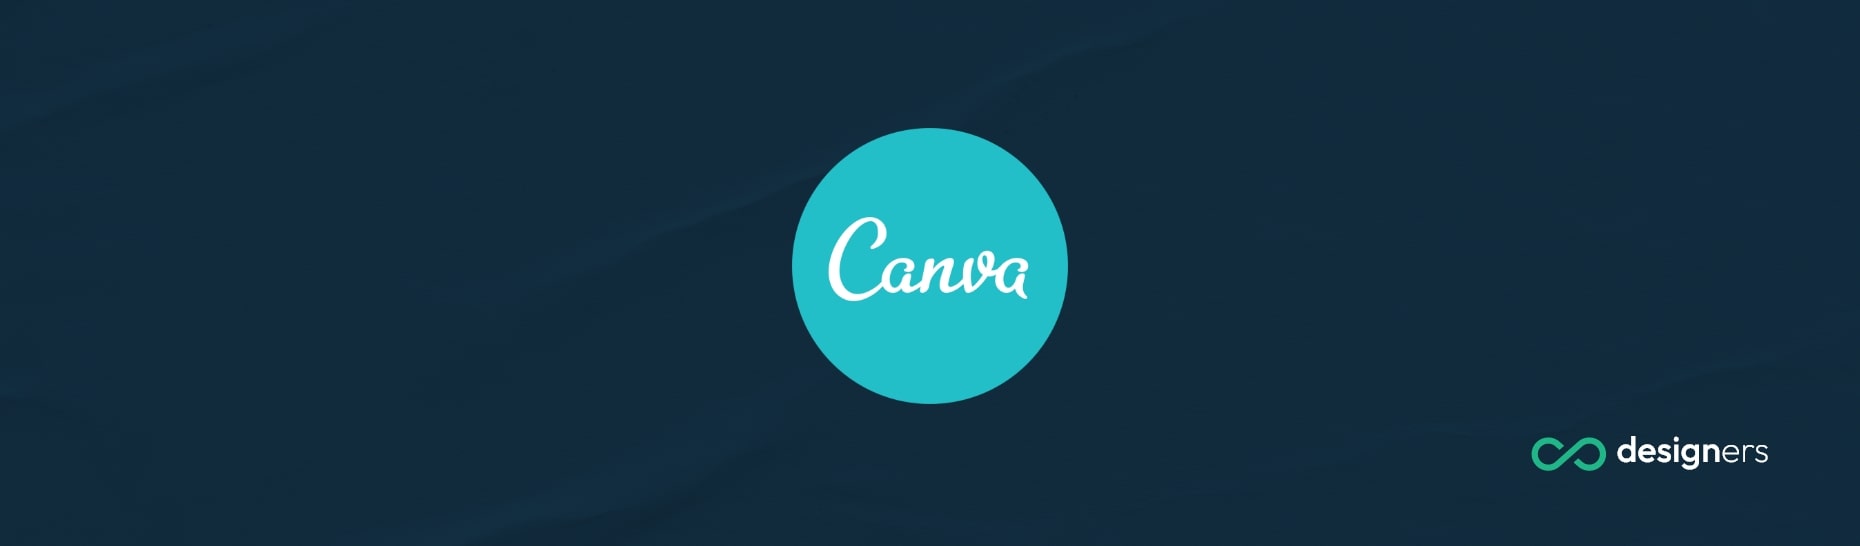 Why Is Canva Not Working on Chrome?